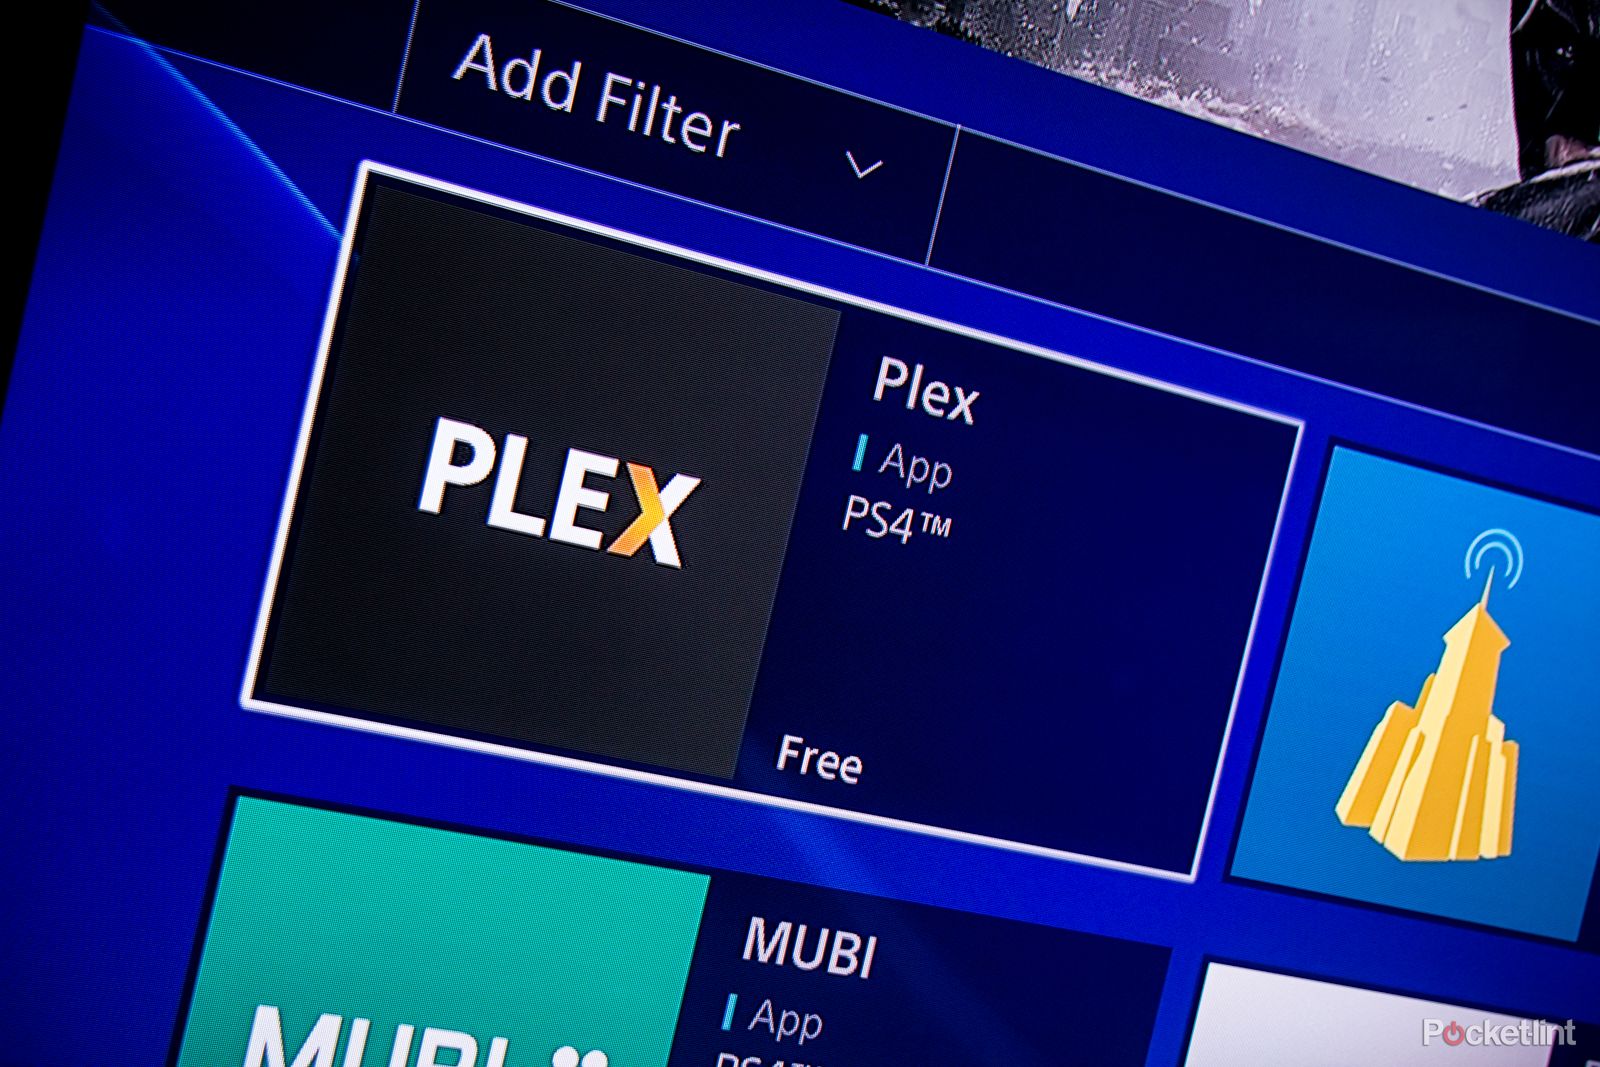 ps4 finally gets home video streaming but from plex not sony image 1